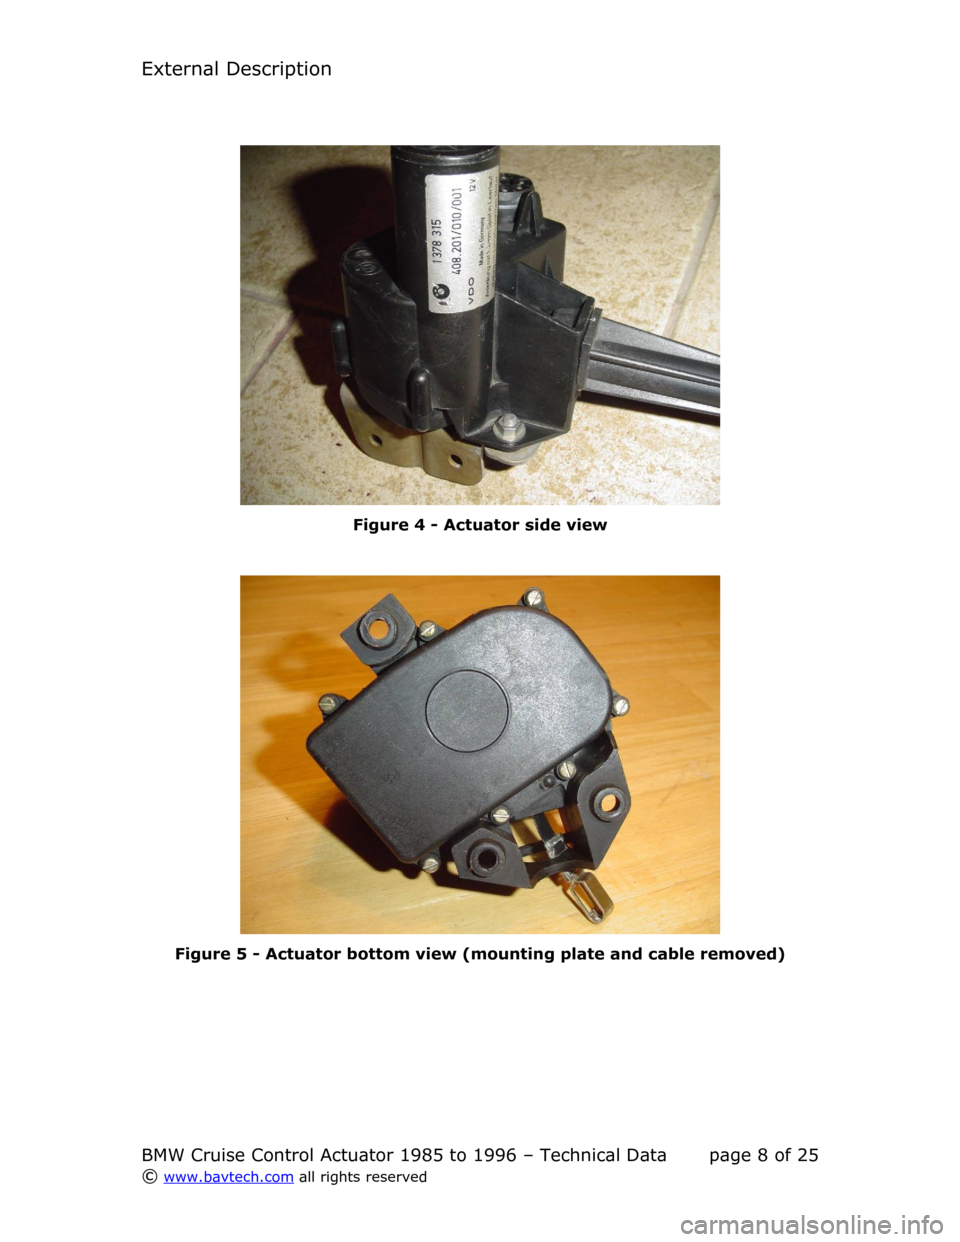 BMW 5 SERIES 1991 E34 Cruise Control Acutator External Description
Figure  4  - Actuator side view
Figure  5  - Actuator bottom view (mounting plate and cable removed)
BMW Cruise Control Actuator 1985 to 1996 – Technical Data page  8  of  25
©